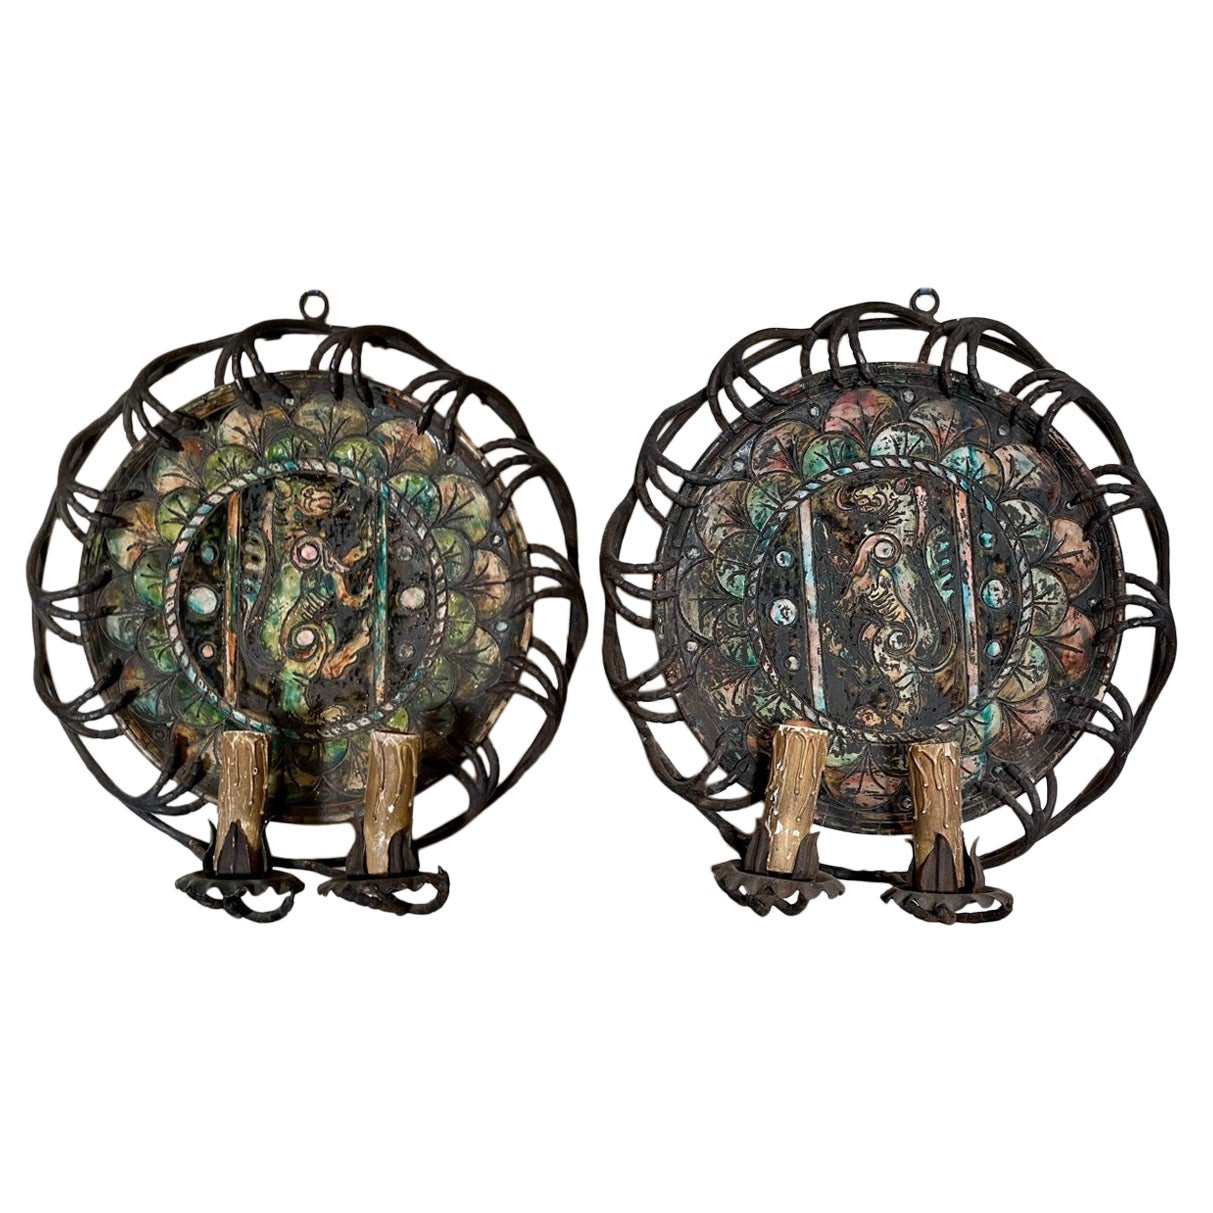 Pair Antique English Majolica Wall Lights with Hand-Wrought Iron Mounts Ca. 1880 For Sale